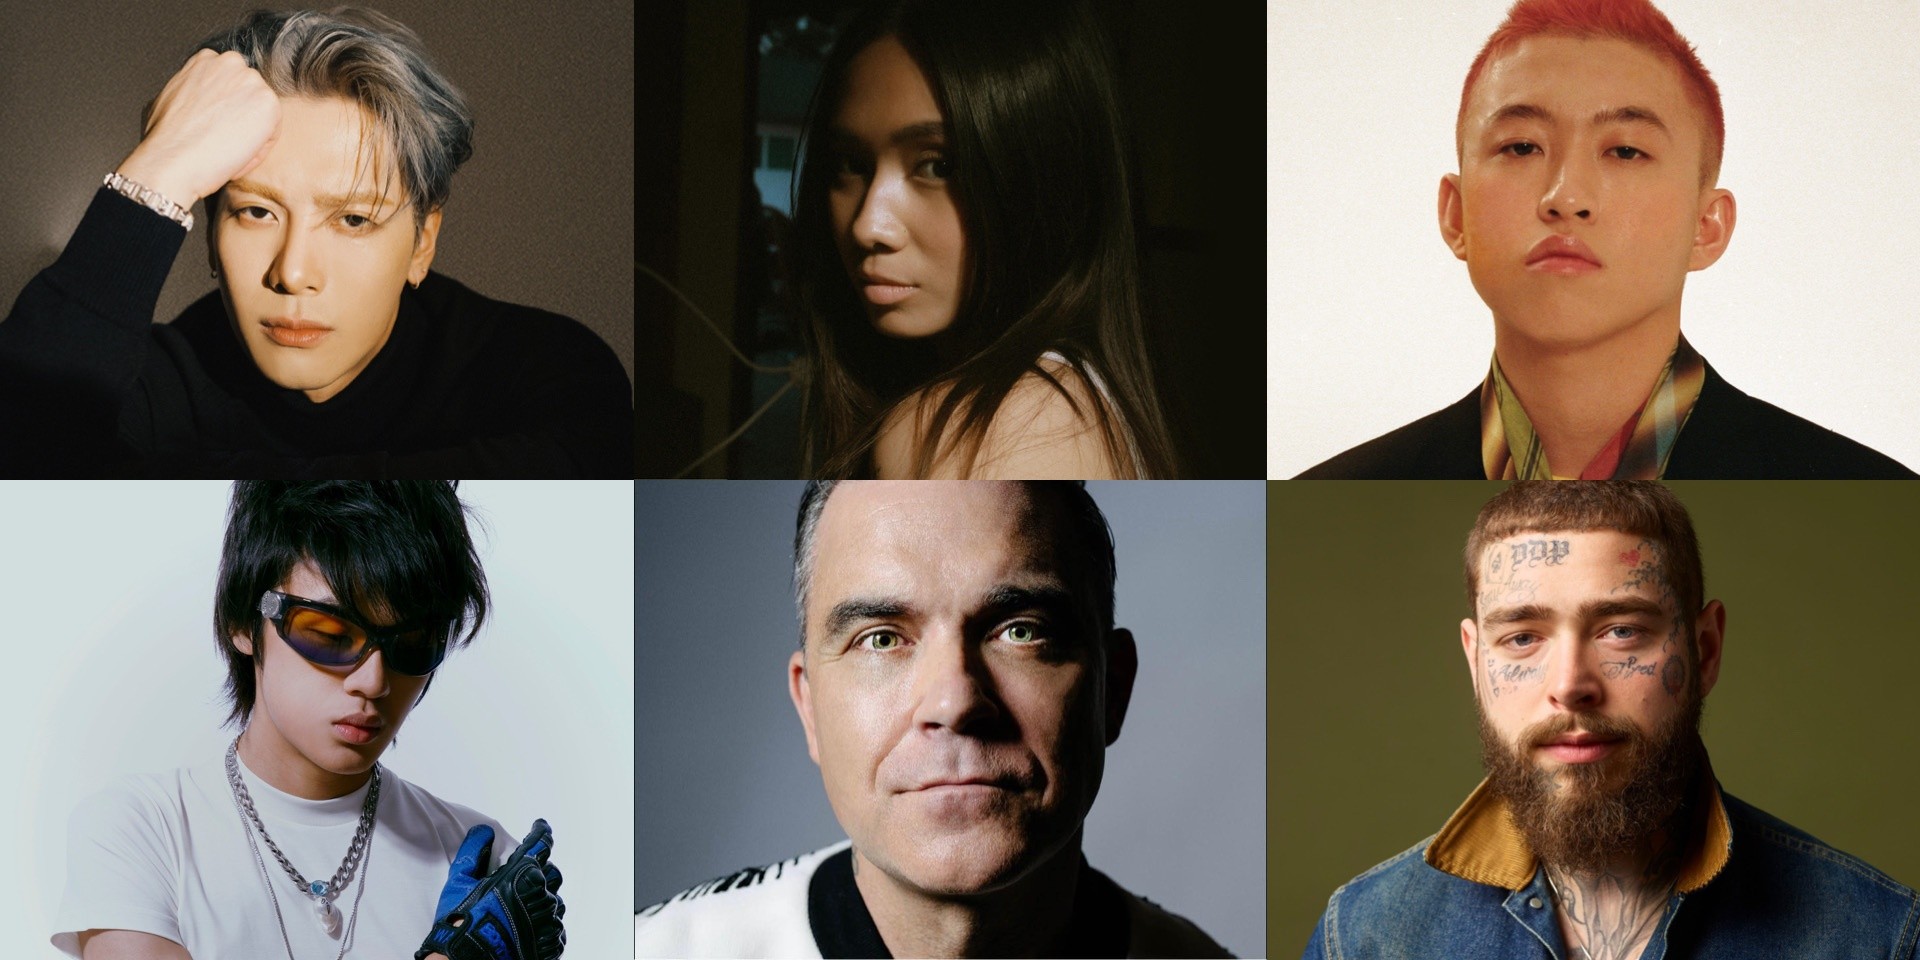 Singapore’s F1 Grand Prix 2023 announces lineup – 88rising acts: Jackson Wang, NIKI, Rich Brian, and Warren Hue, Robbie Williams, and Post Malone